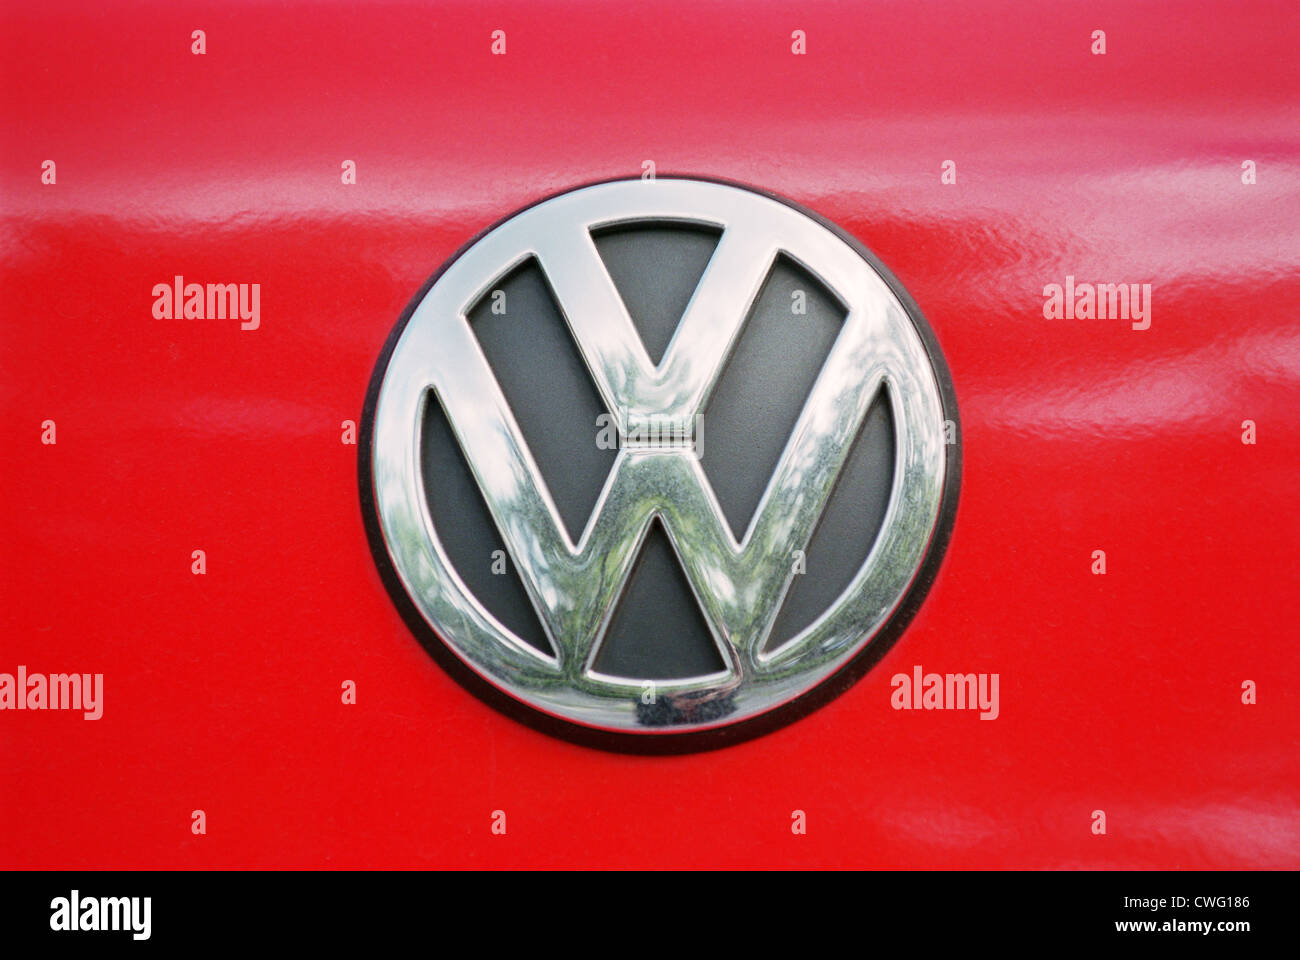 Heck of a VW logo Stock Photo